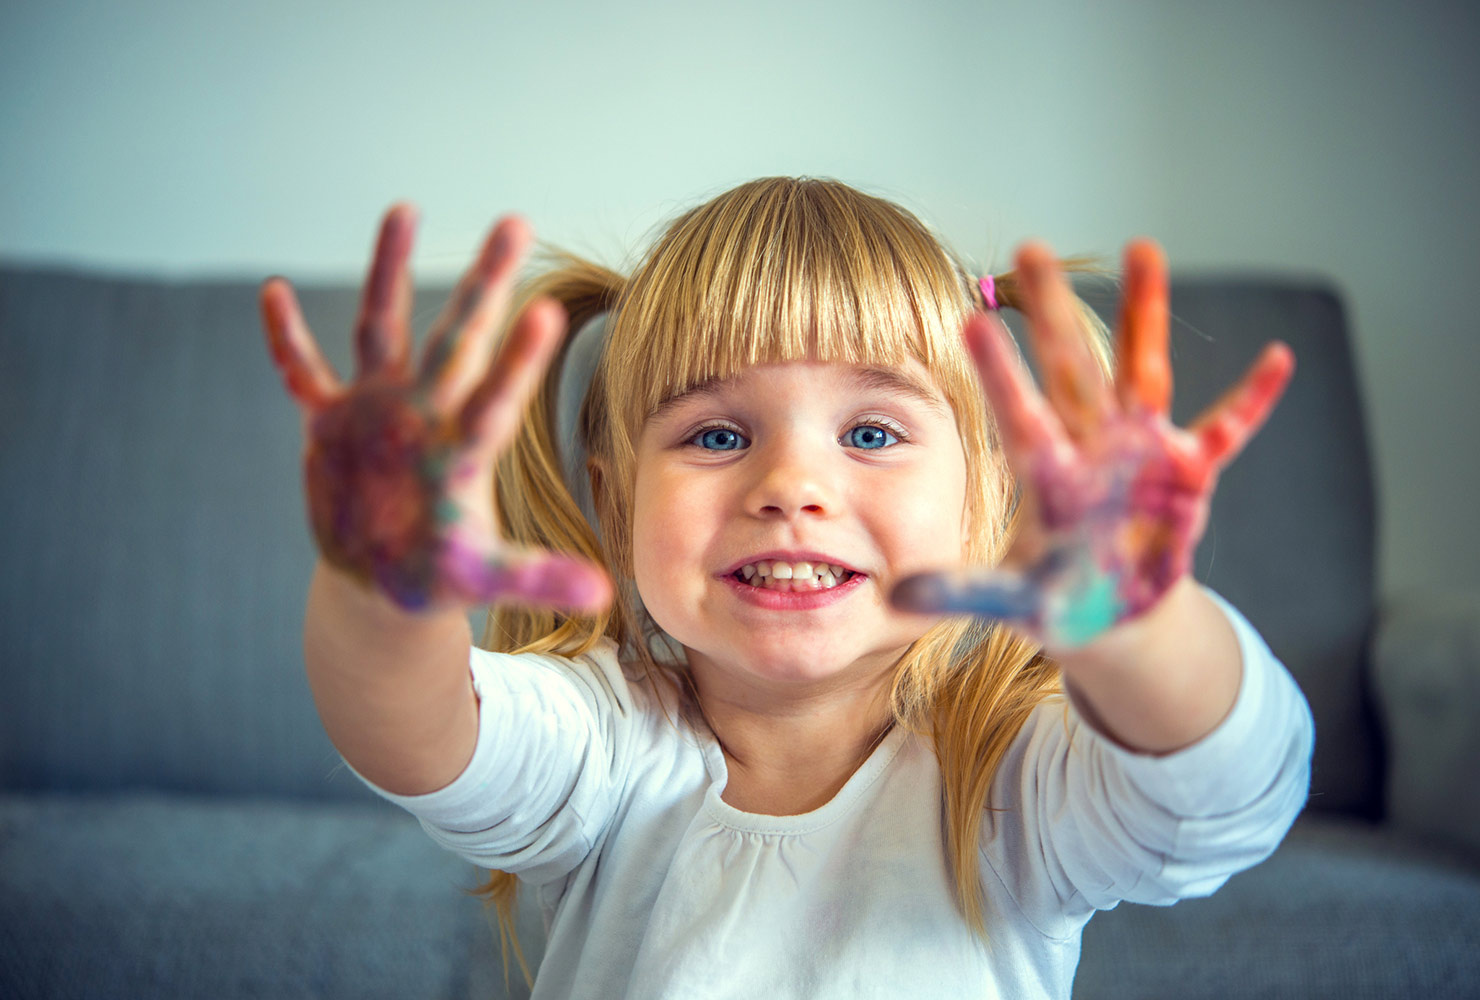 kid crafting with messy hands